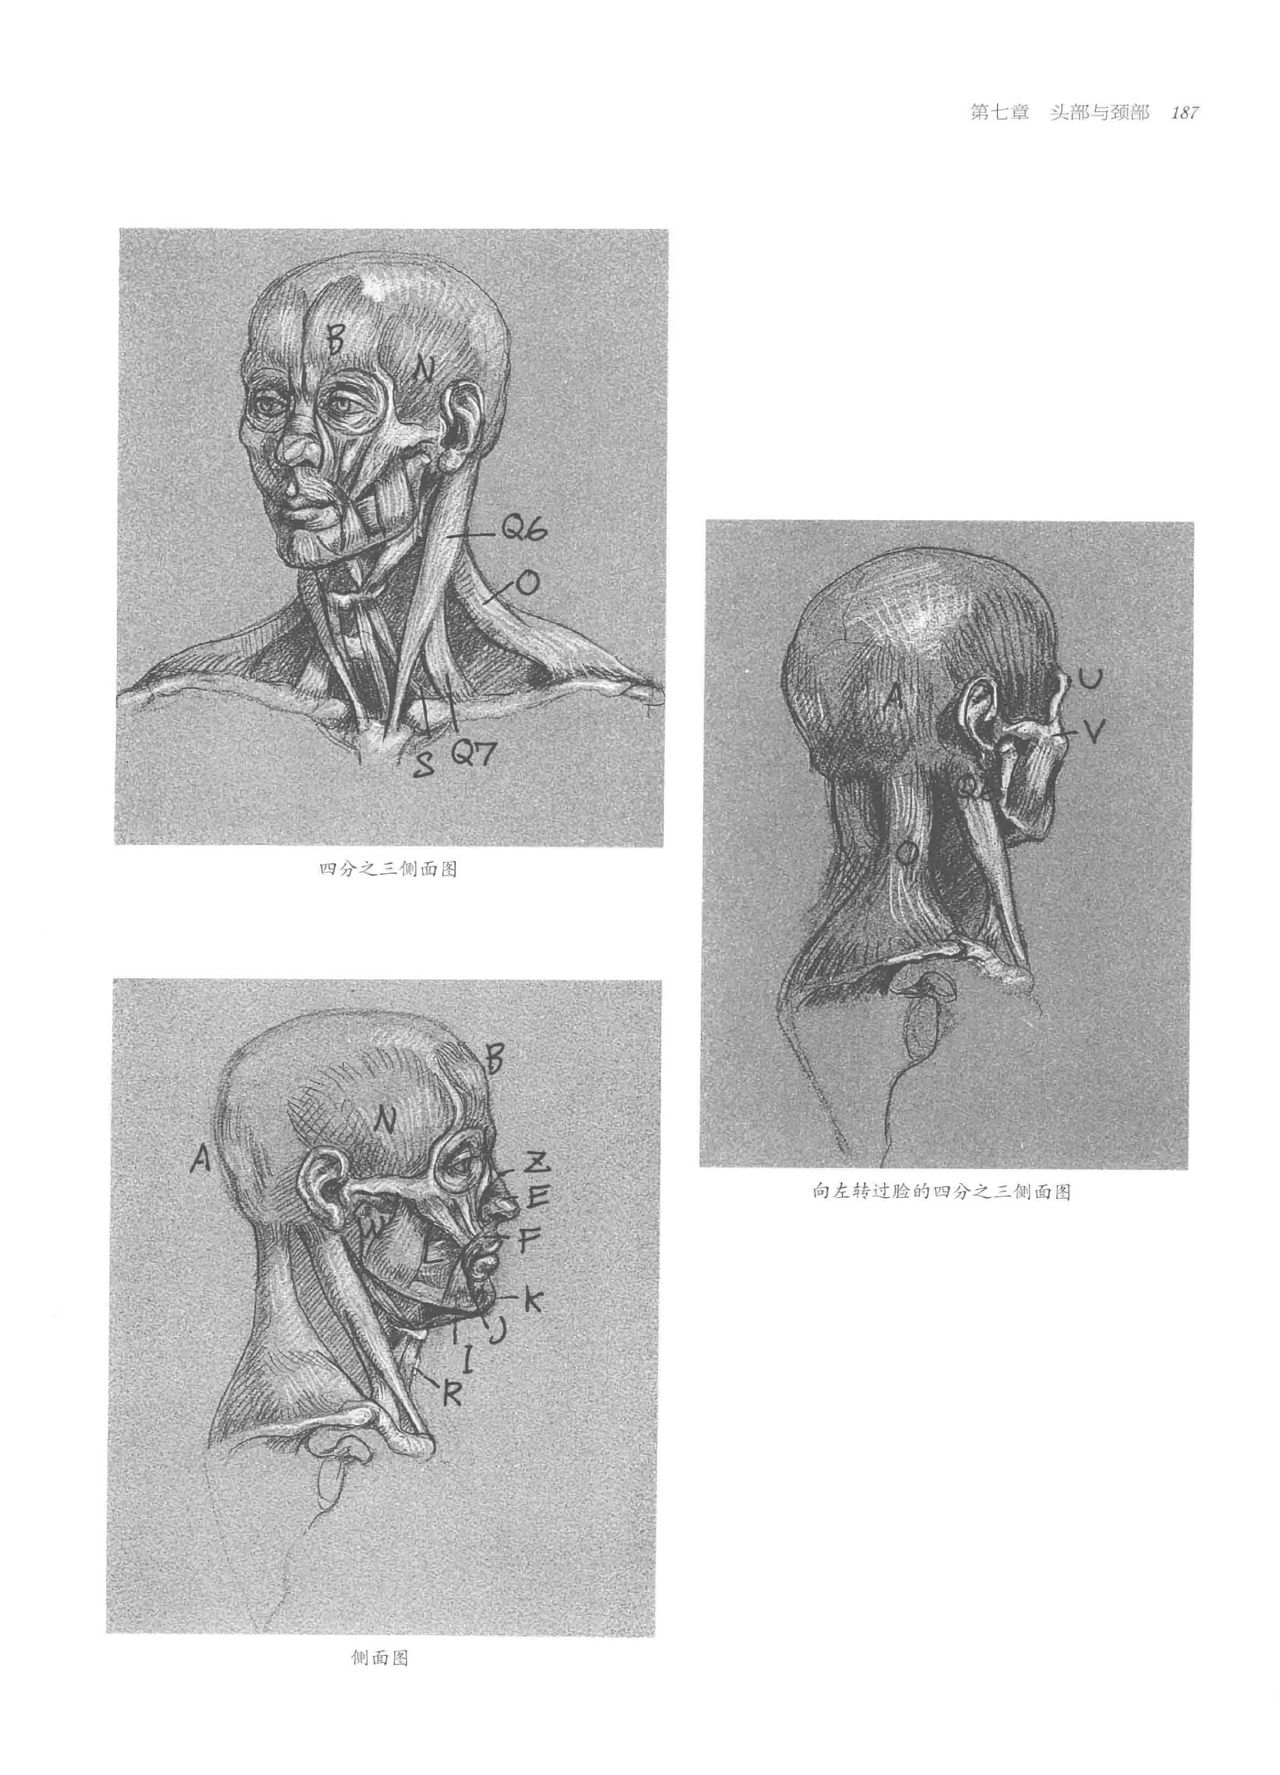 Anatomy-A Complete Guide for Artists - Joseph Sheppard [Chinese] 187